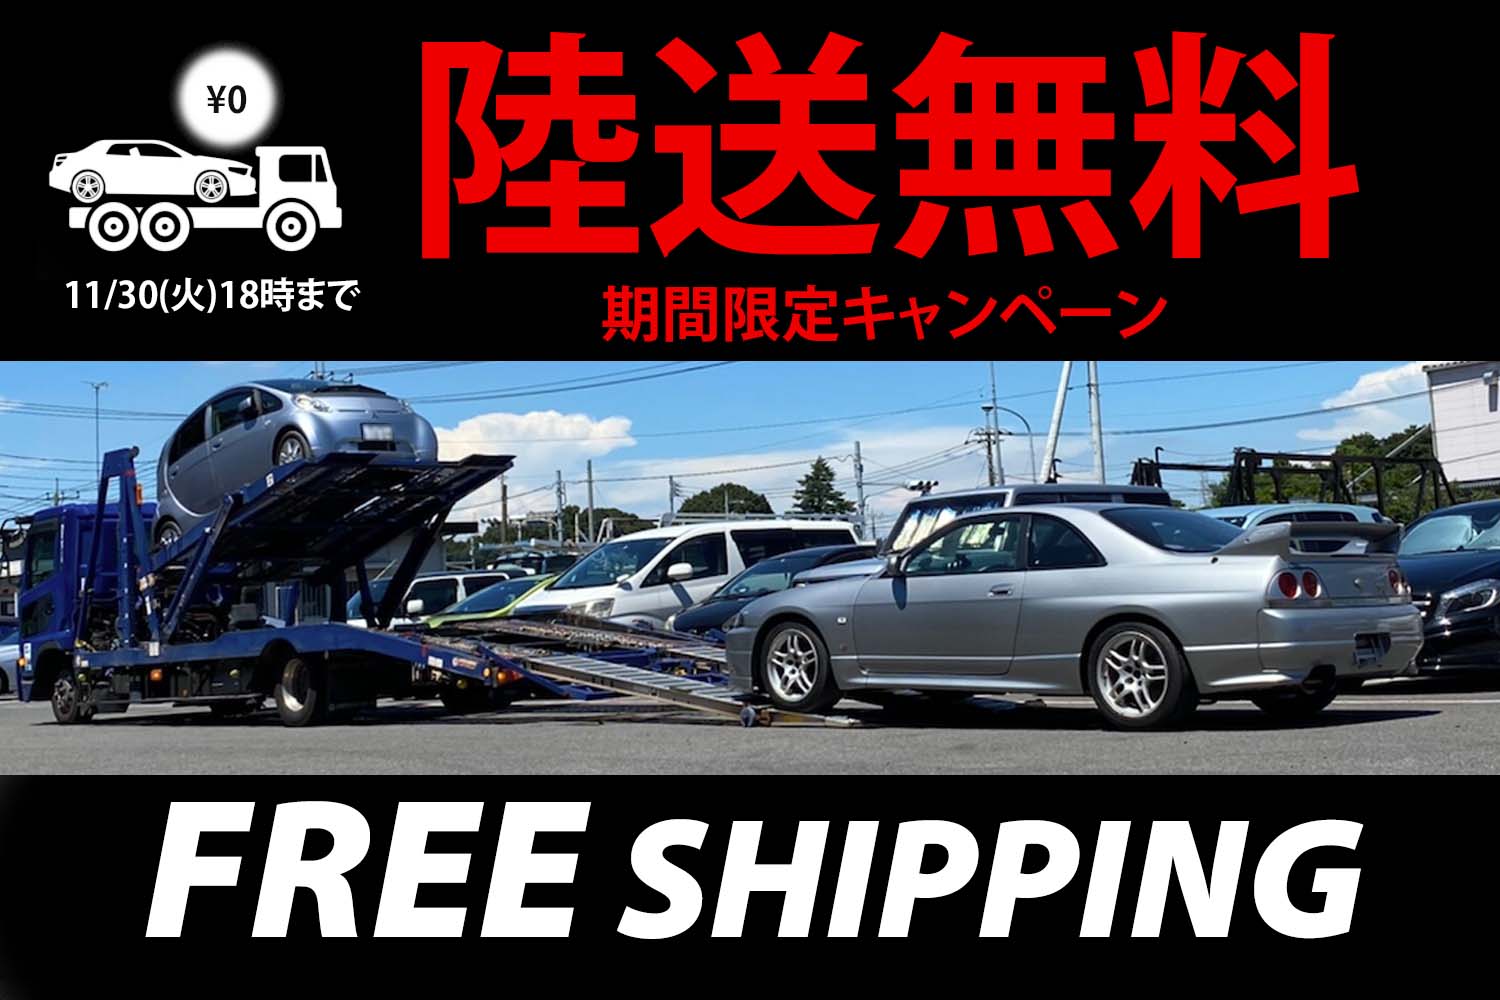 Free Shipping on JDM cars from Toprank Global